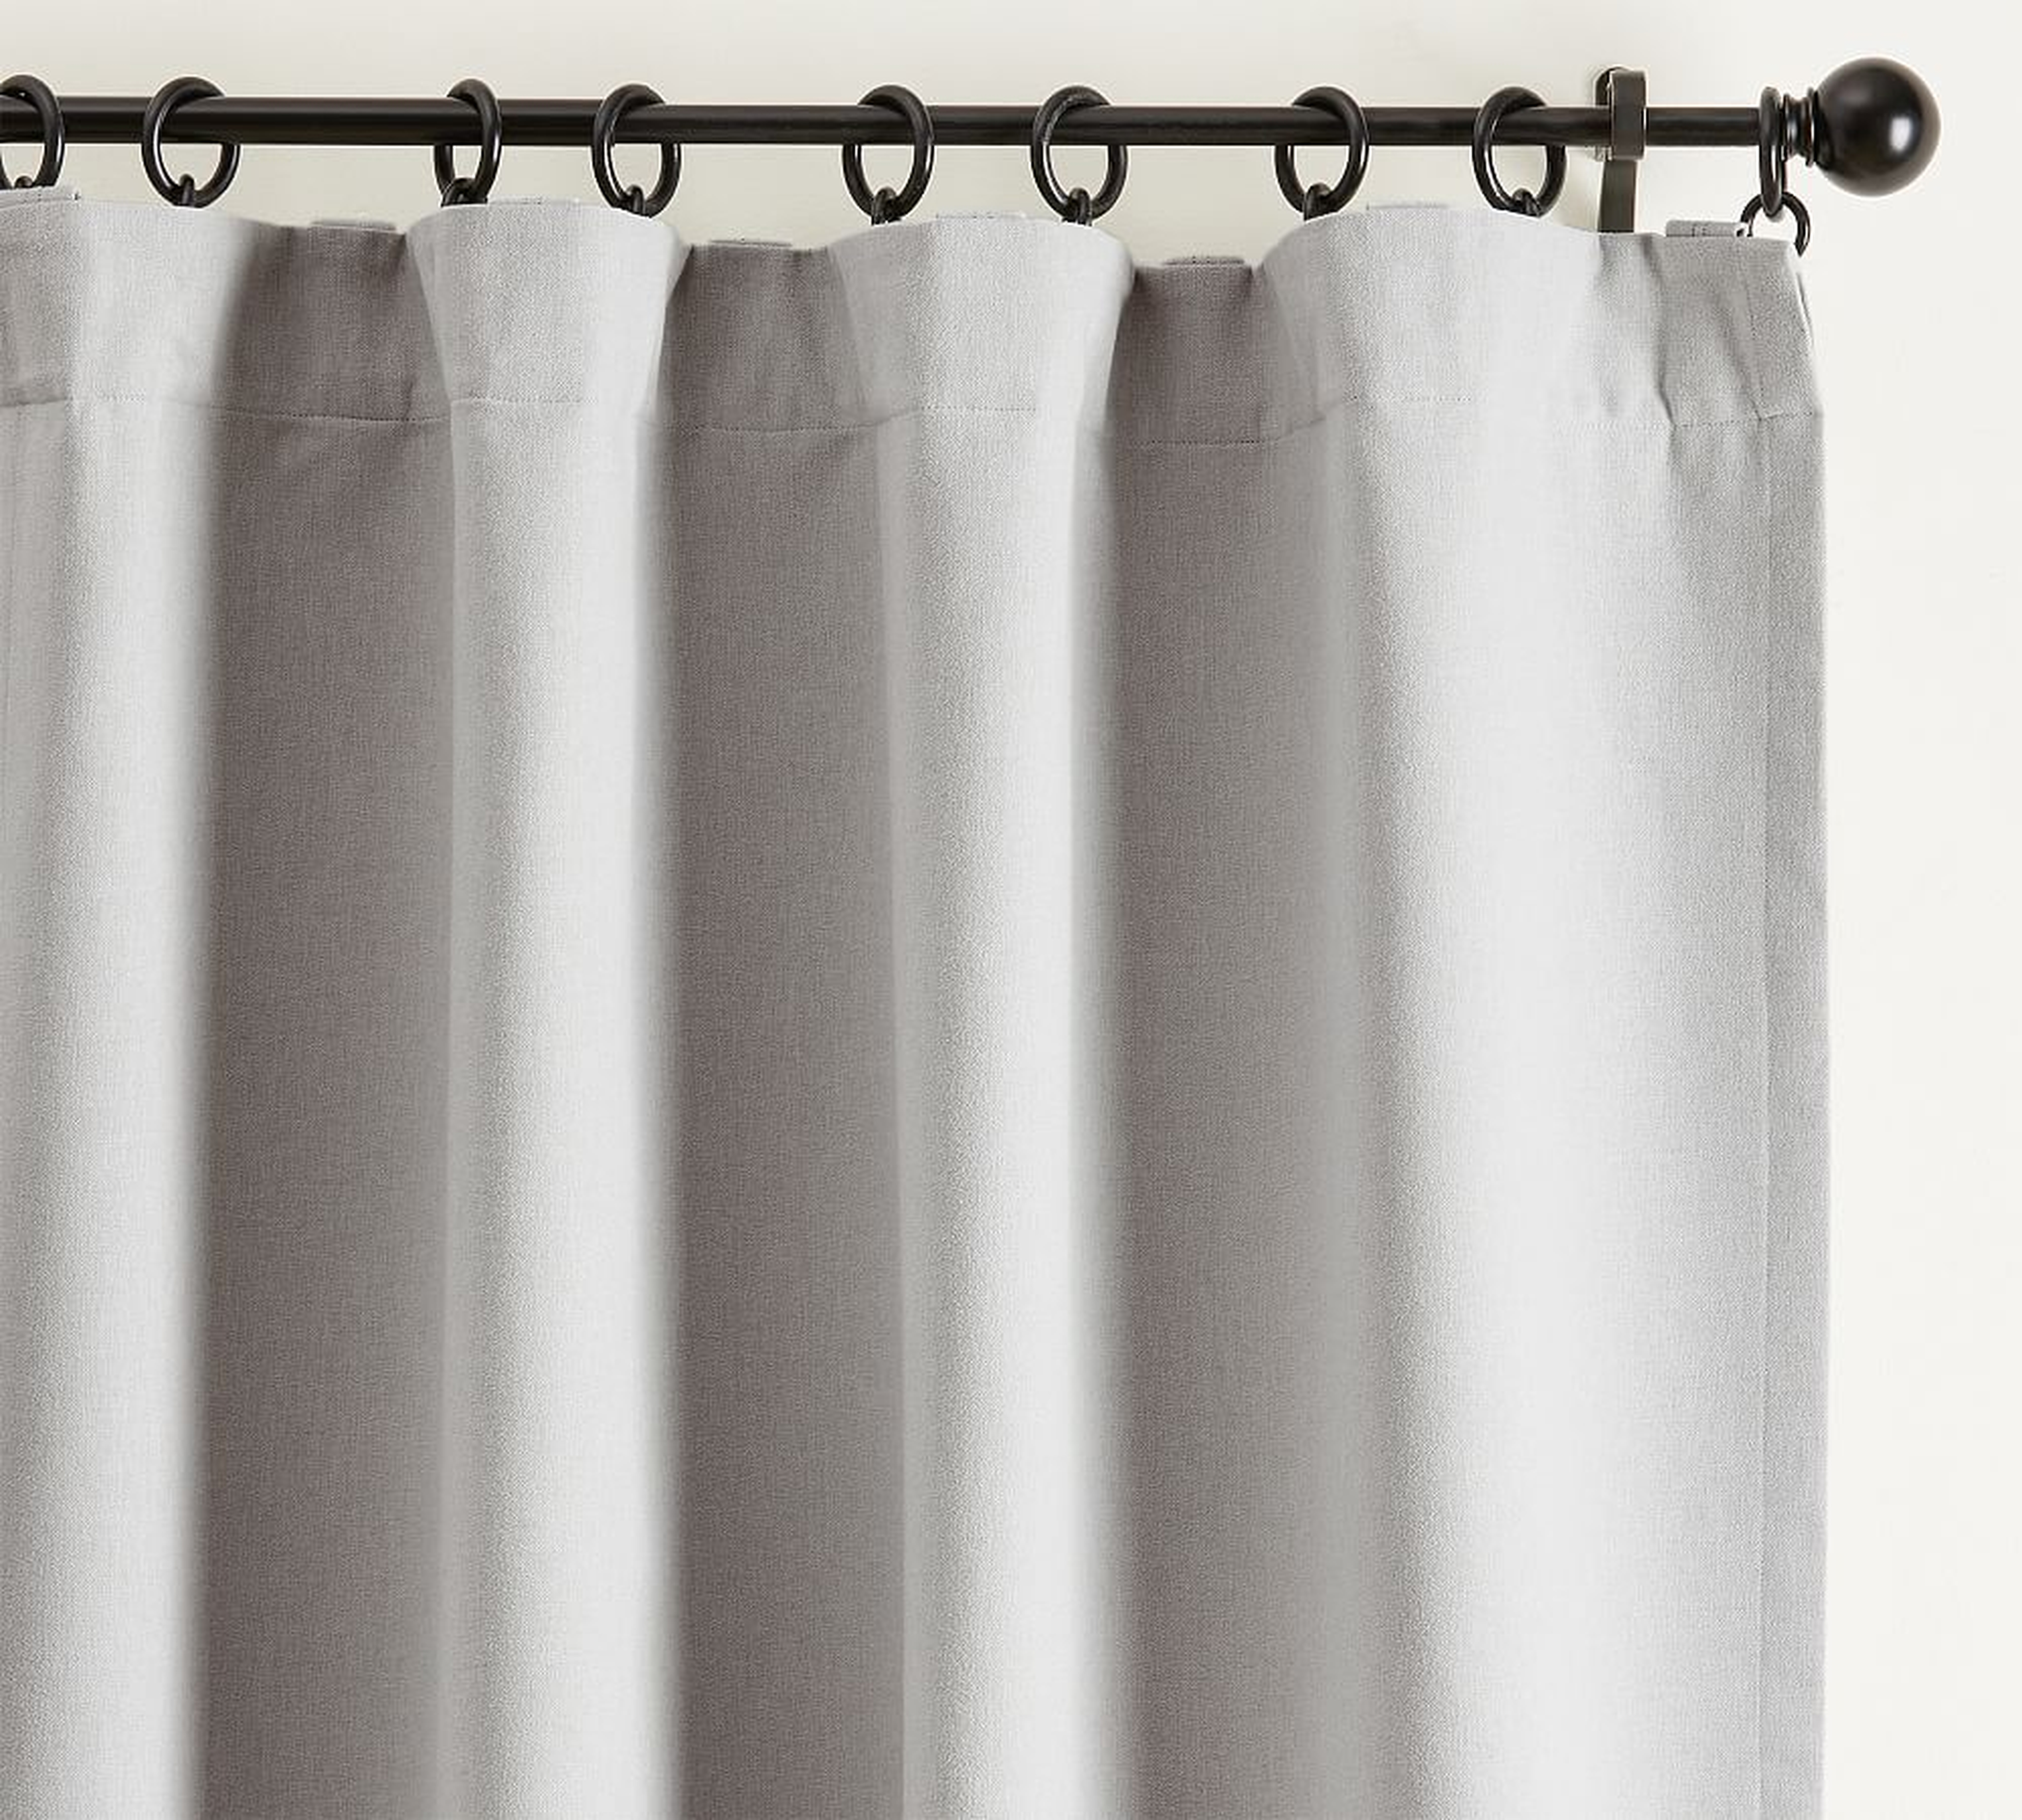 Peace & Quiet Noise-Reducing Blackout Curtain, Light Gray, 50 x 96" - Pottery Barn